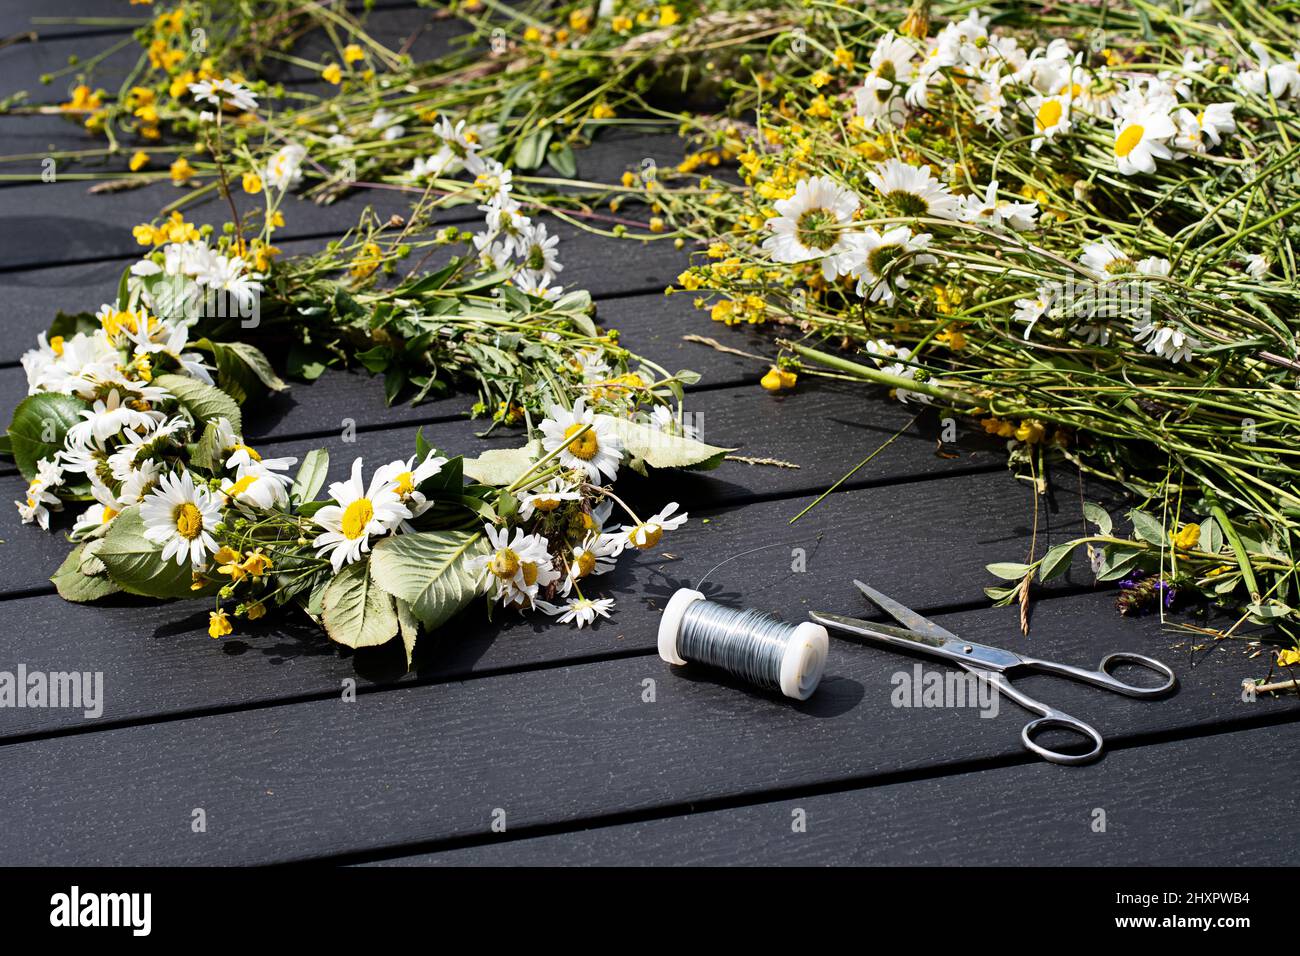 Creating traditional Swedish Midsummer flower crown using wild summer flowers, scissor and wire. Photo taken on Midsummer Eve in Sweden. Stock Photo